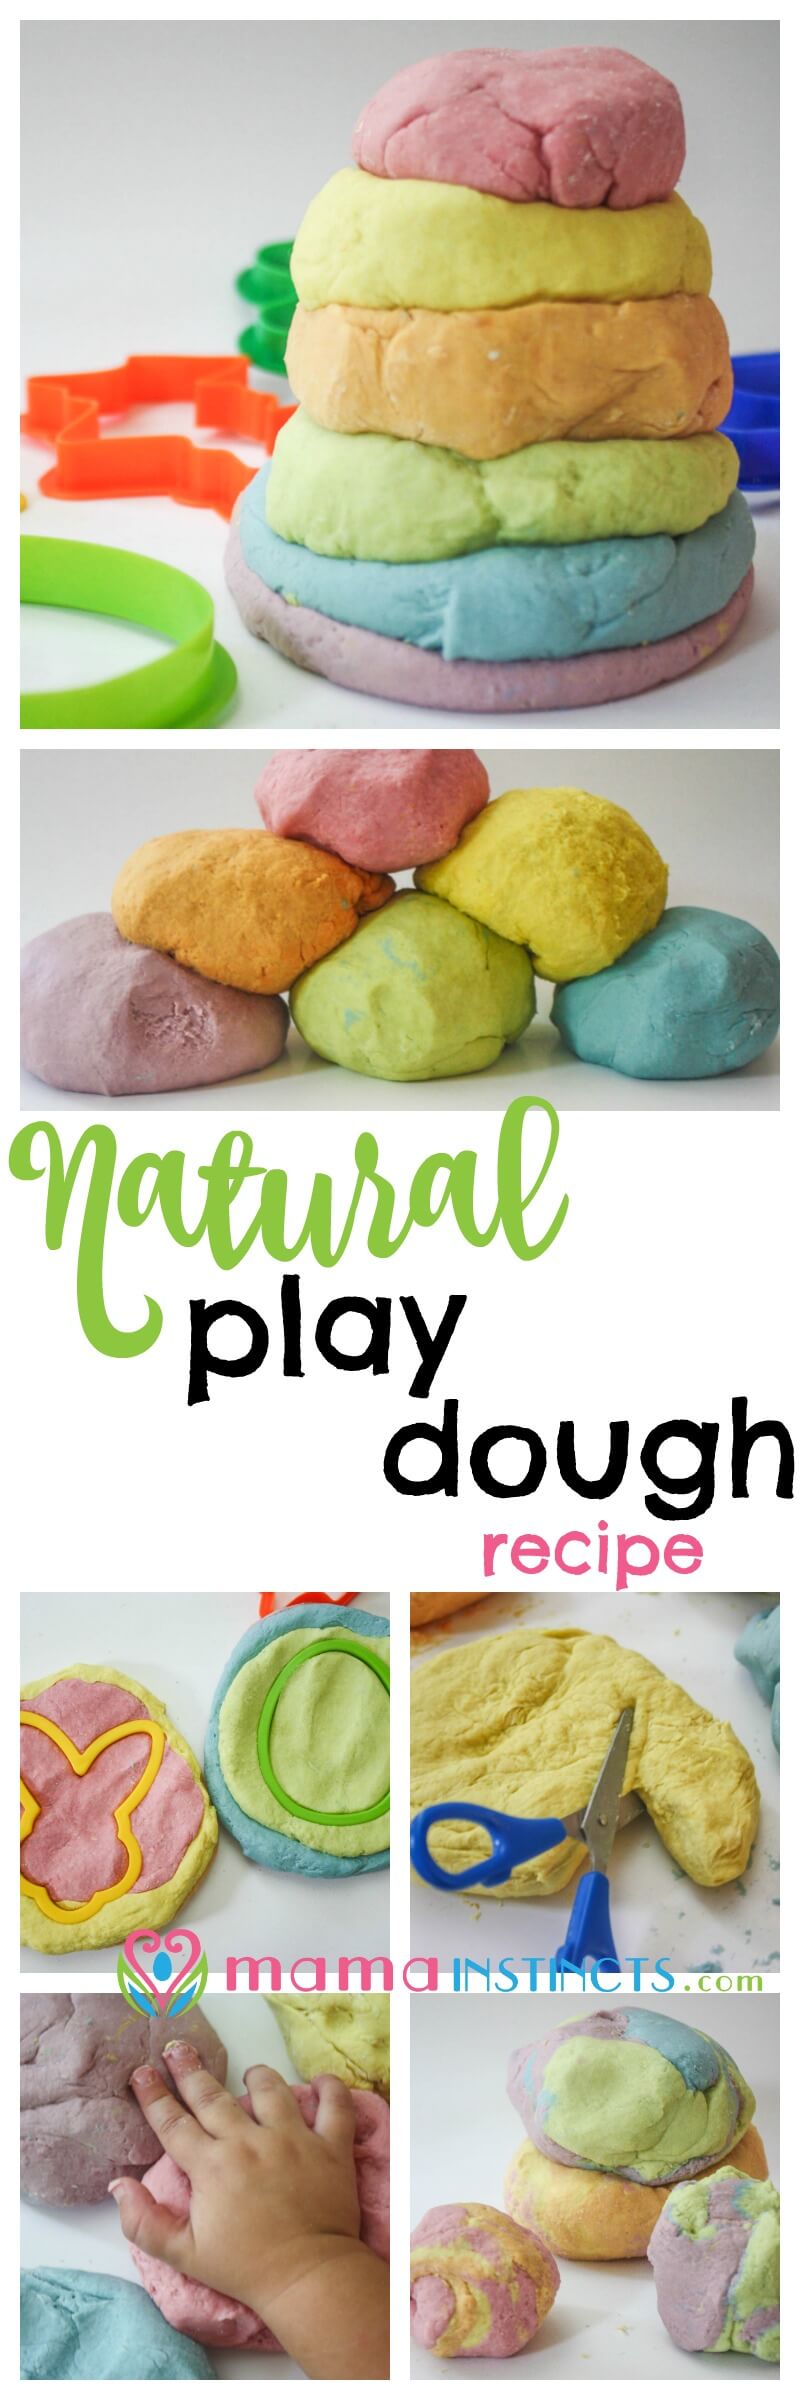 Try this recipe and stop worrying about your kid putting play dough in their mouth. It's safe, non-toxic and easy to make. The best part is that it’s made with ingredients you find in any kitchen. Try this natural play dough recipe today or pin it for later.